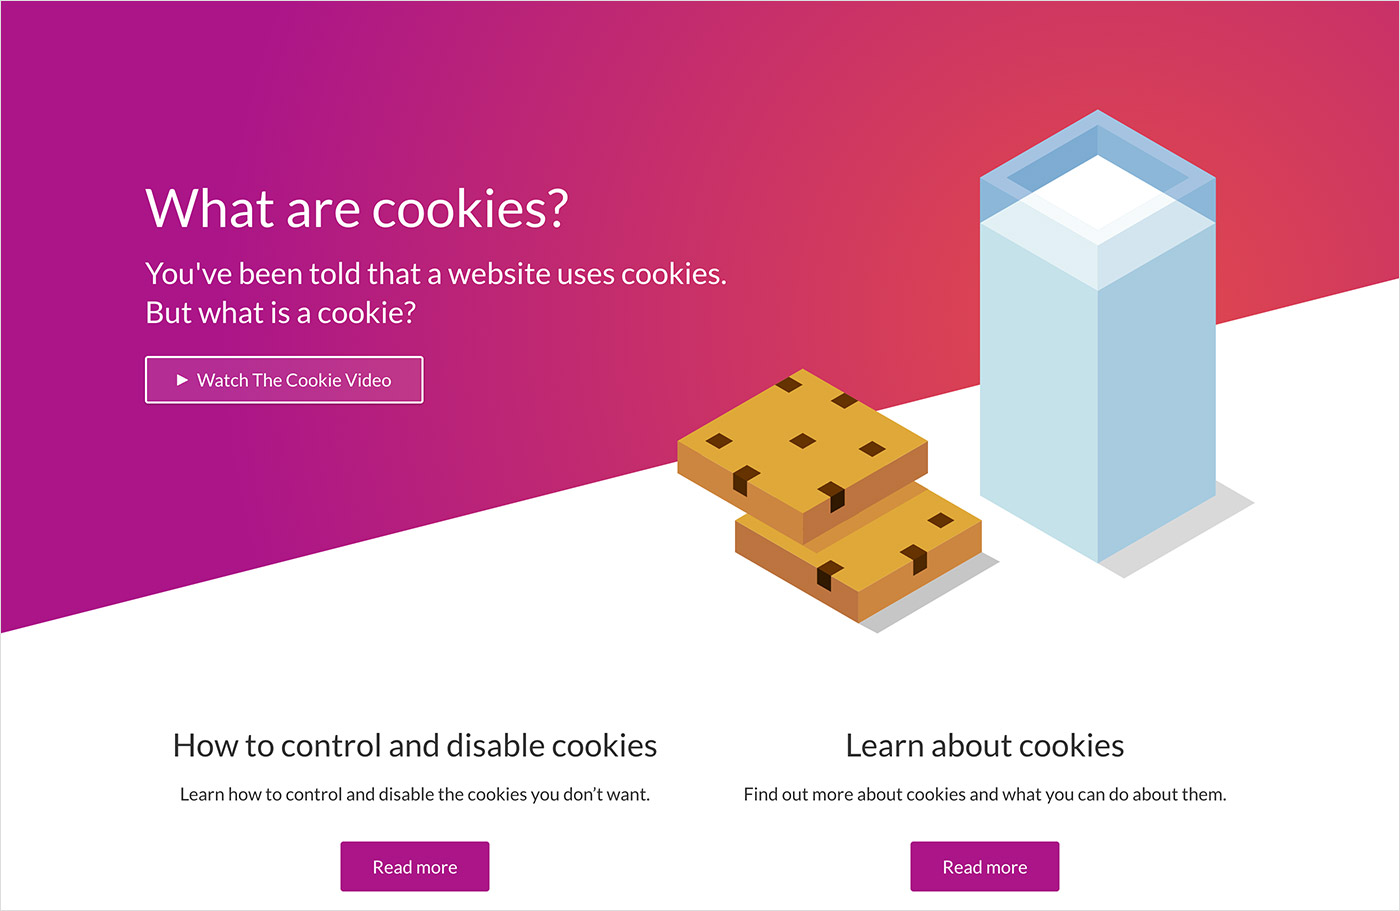 What are cookies? | Cookies & Youウェブサイトの画面キャプチャ画像